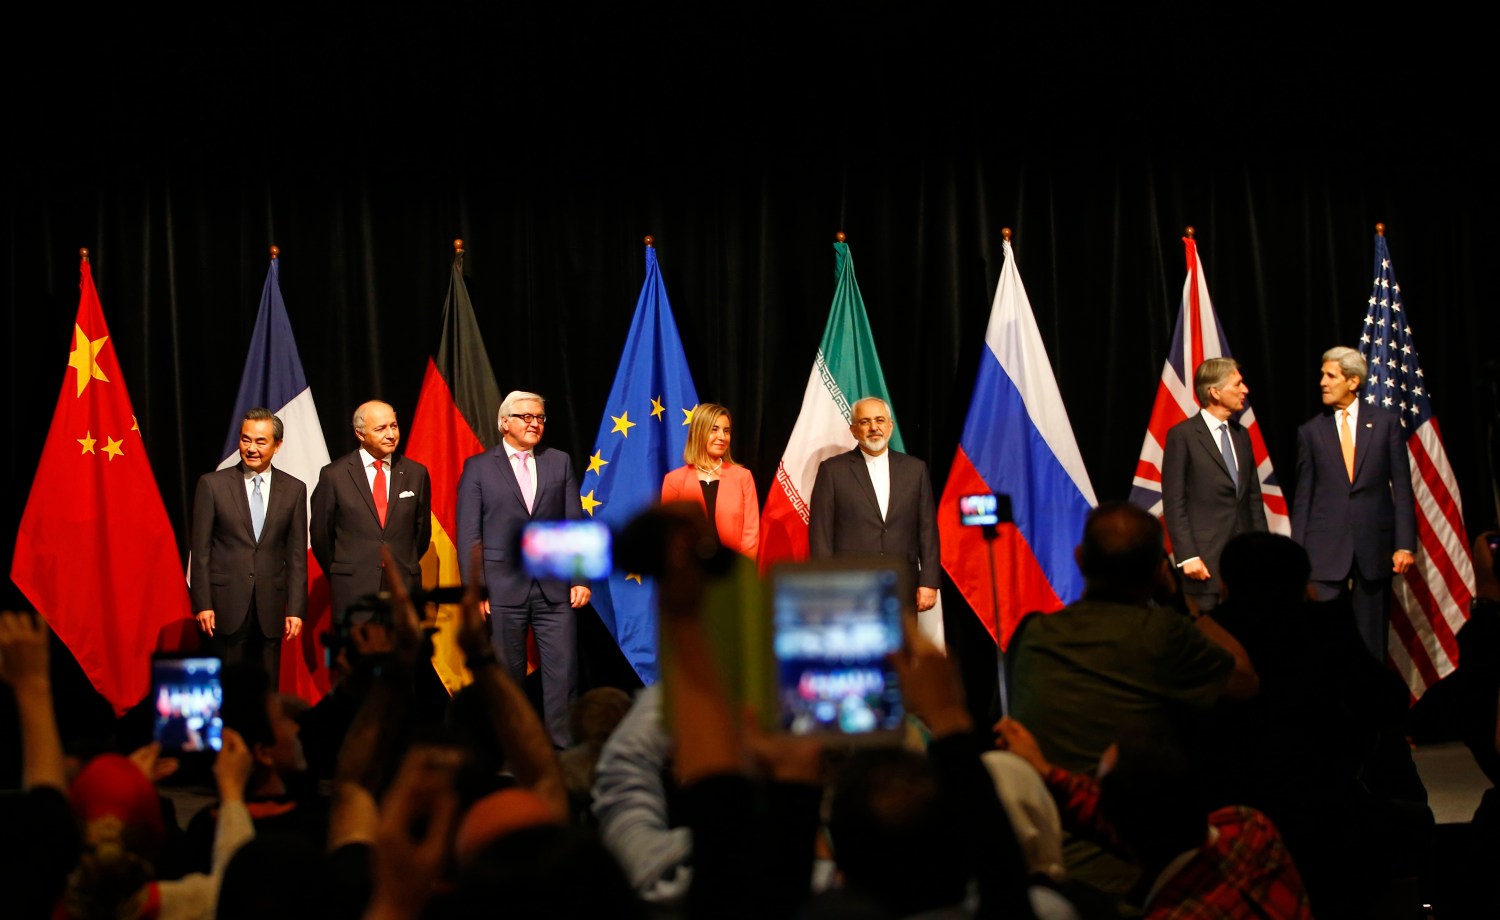 Chinese Foreign Minister Wang Yi, French Foreign Minister Laurent Fabius, German Foreign Minister Frank Walter Steinmeier, High Representative of the European Union for Foreign Affairs and Security Policy Federica Mogherini, Iranian Foreign Minister Mohammad Javad Zarif, British Foreign Secretary Philip Hammond and U.S. Secretary of State John Kerry (L-R) pose for a family picture after the last plenary session at the United Nations building in Vienna, Austria July 14, 2015. Iran and six major world powers reached a nuclear deal on Tuesday, capping more than a decade of on-off negotiations with an agreement that could potentially transform the Middle East, and which Israel called an "historic surrender". REUTERS/Leonhard Foeger - RTX1K9XC